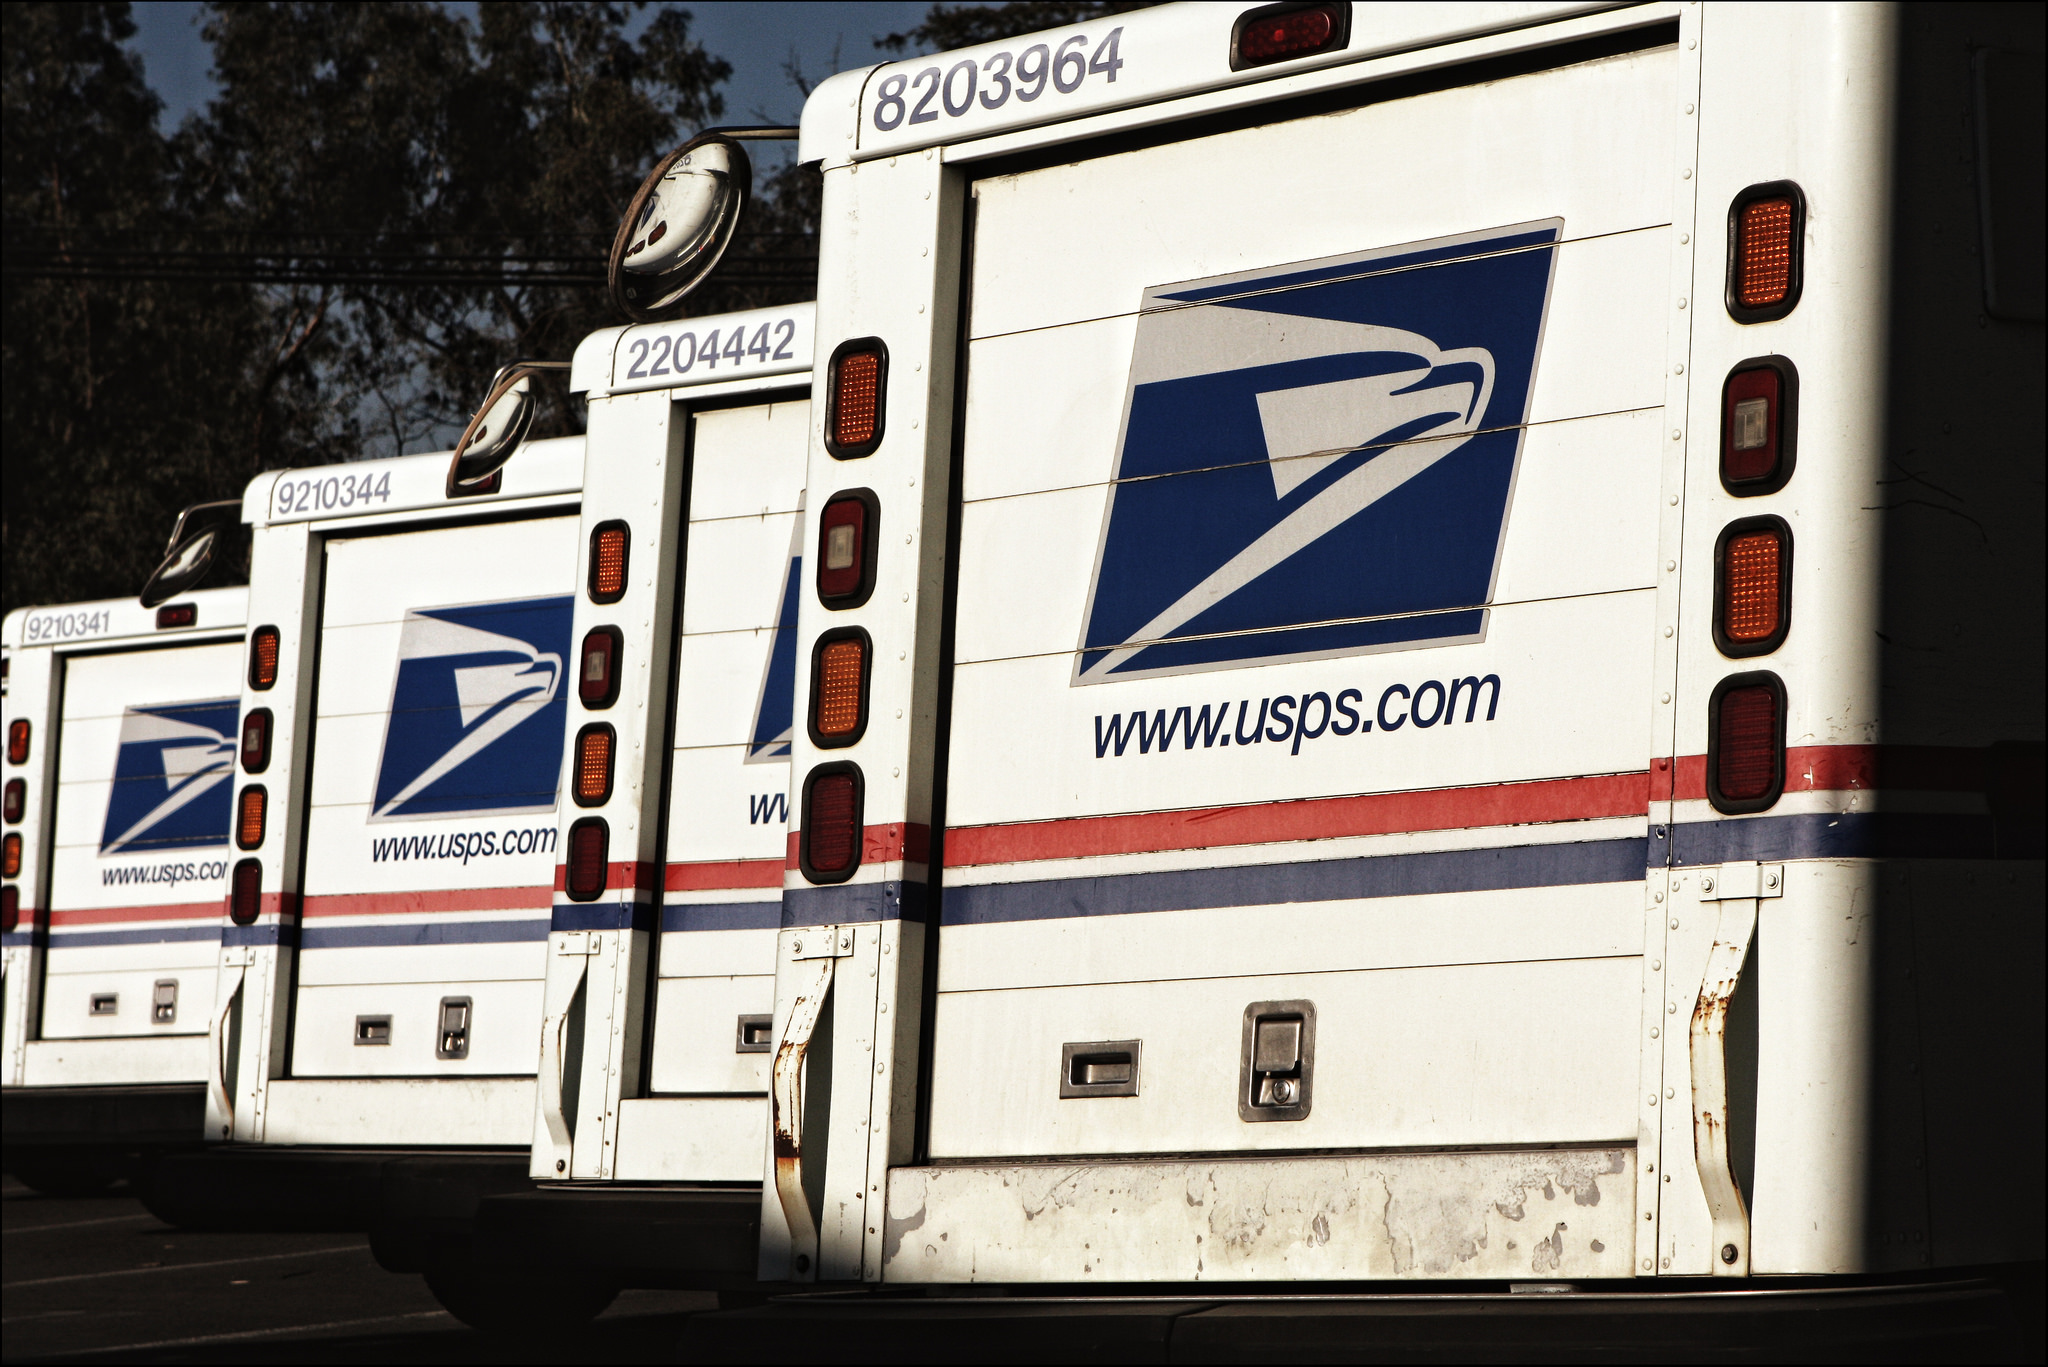 USPS Denies It Has Missing Damaged Package, Still Turns Down Customer’s Insurance Claim After Finding It